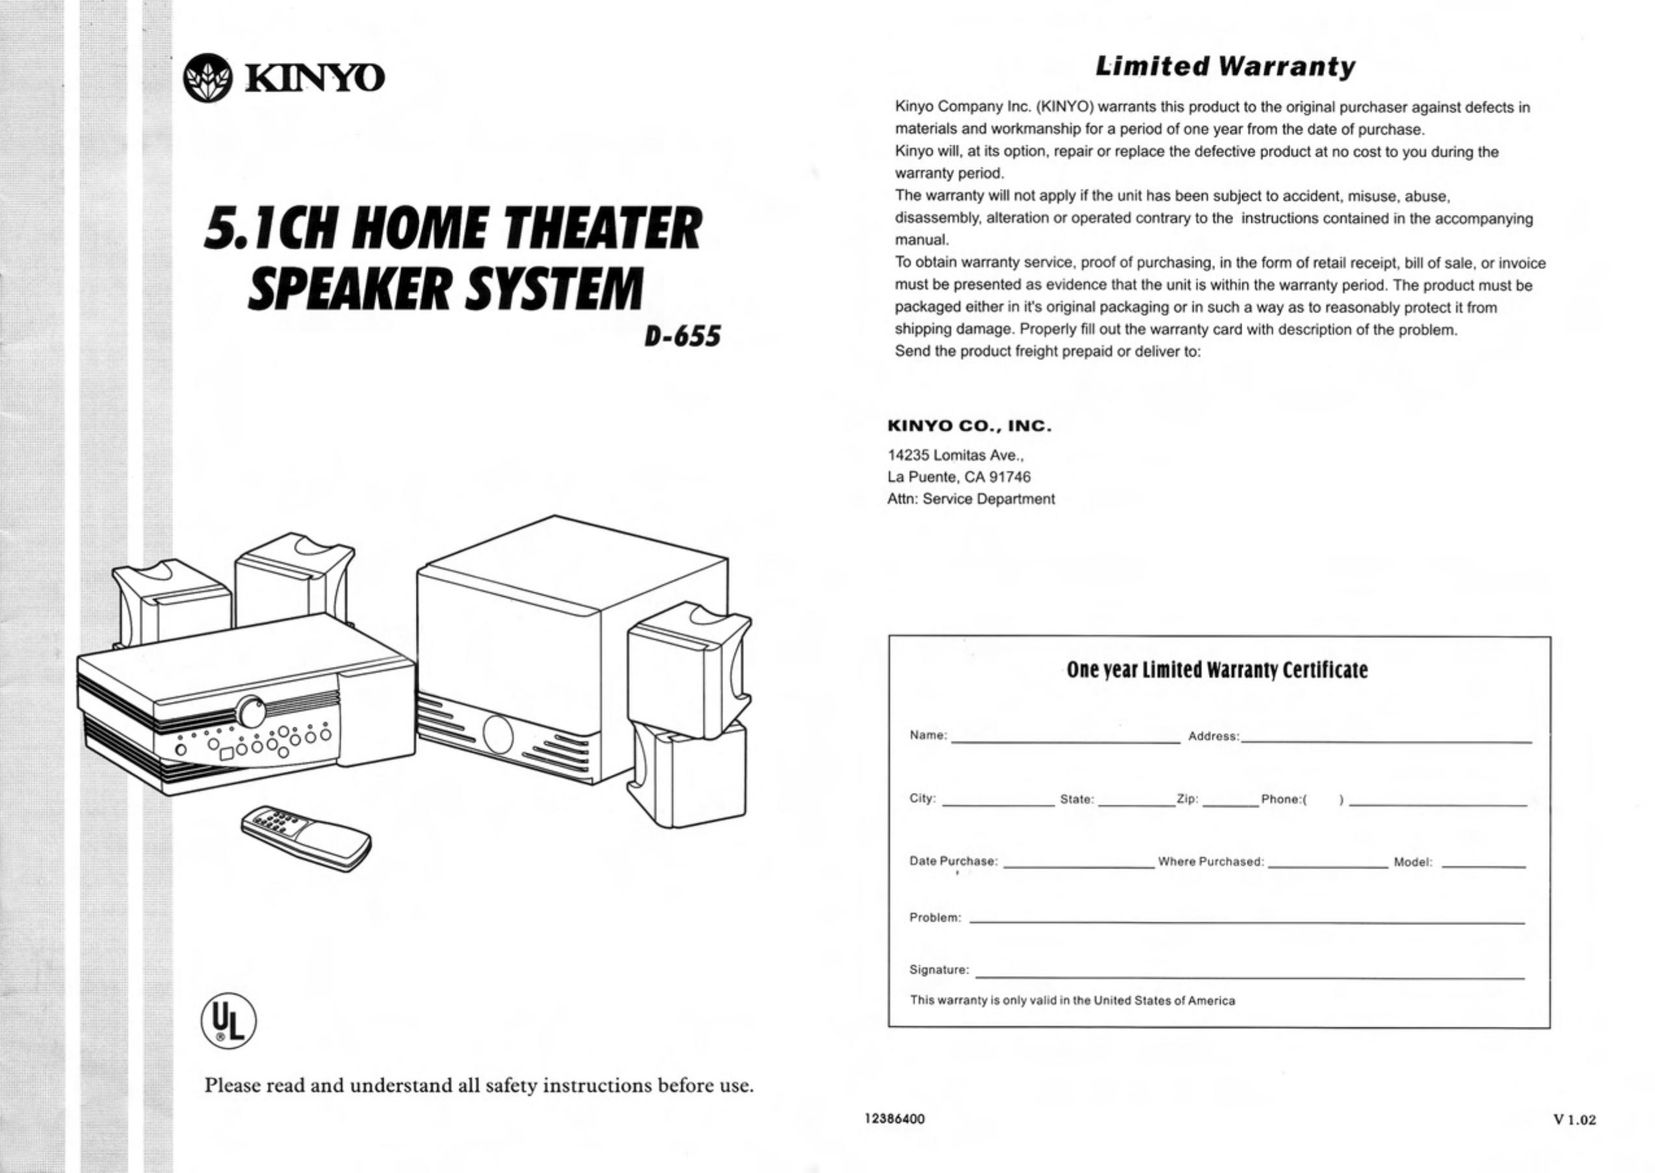 Kinyo D-655 Home Theater System User Manual